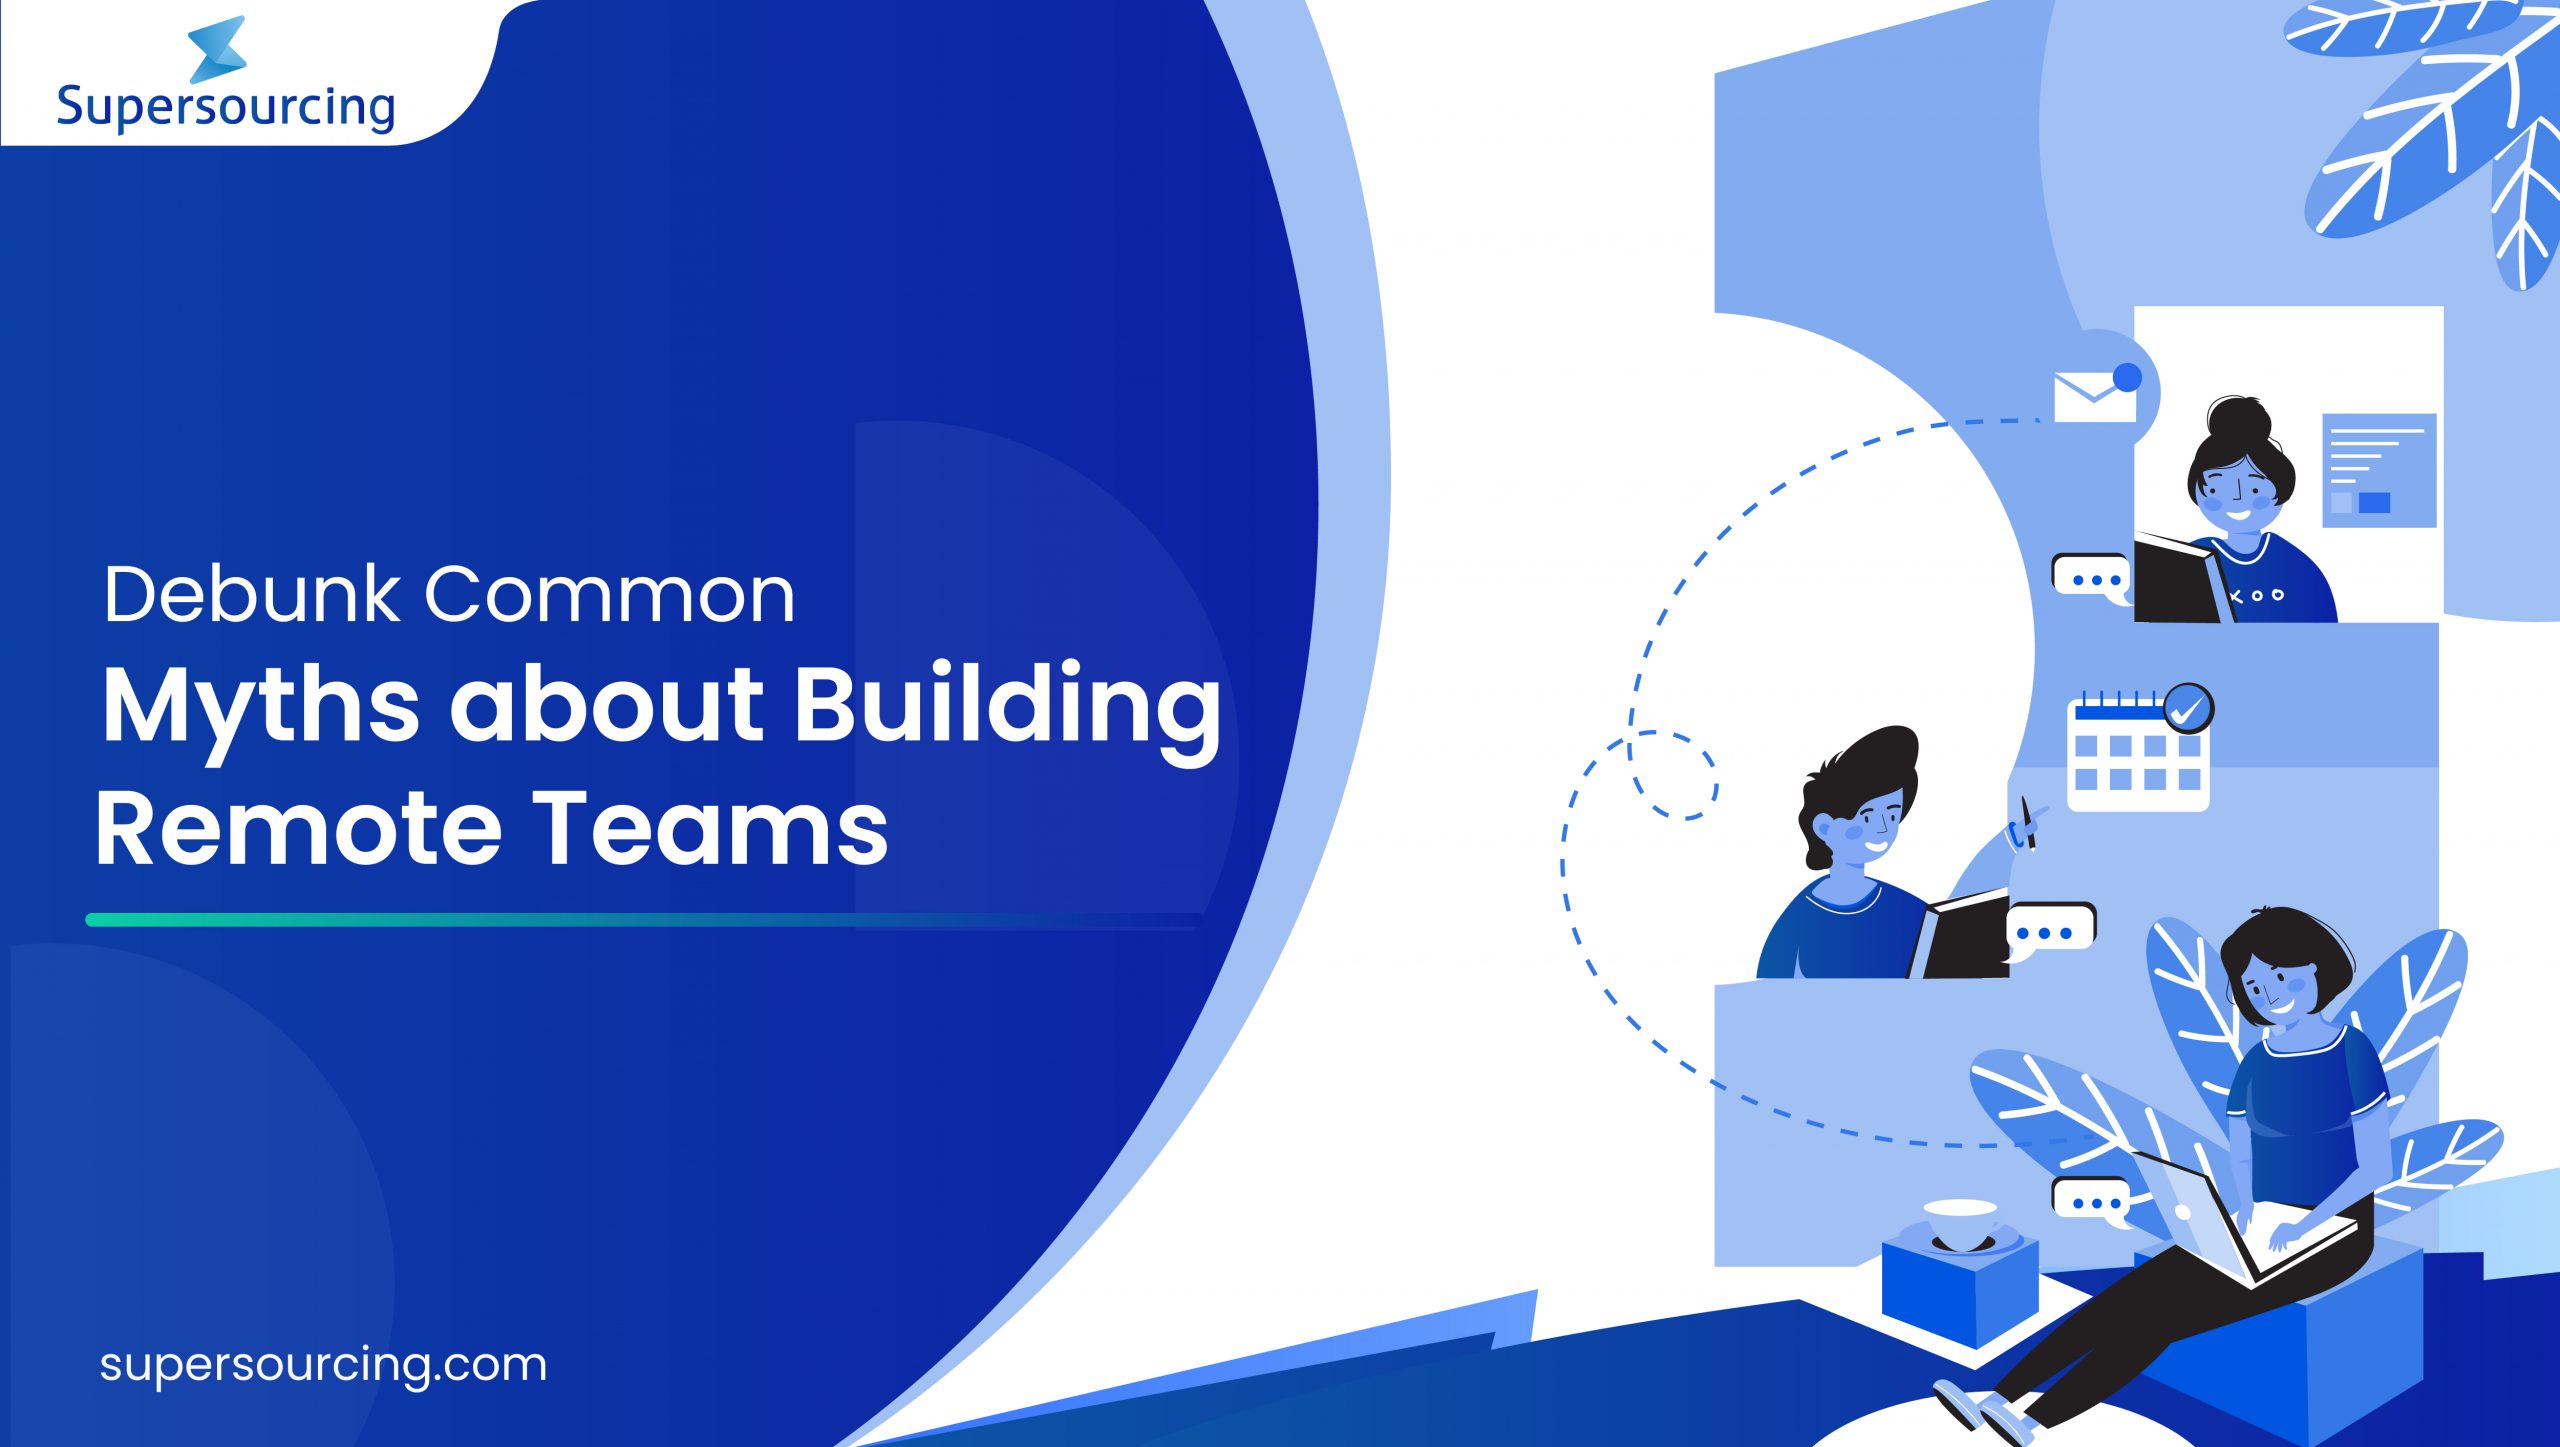 Myths about Building Remote Teams